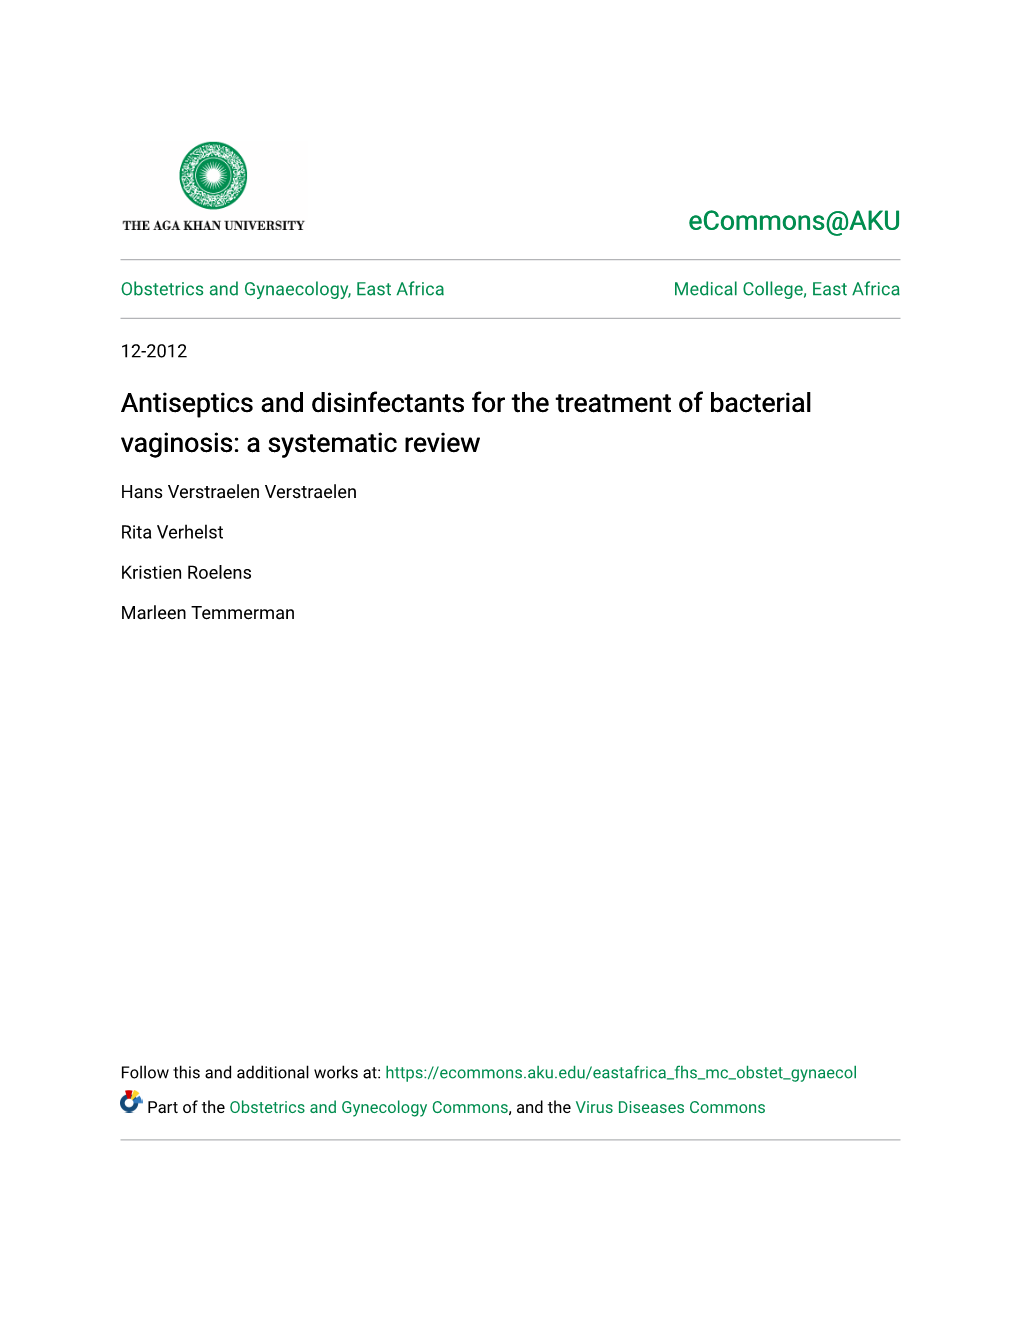 Antiseptics and Disinfectants for the Treatment of Bacterial Vaginosis: a Systematic Review